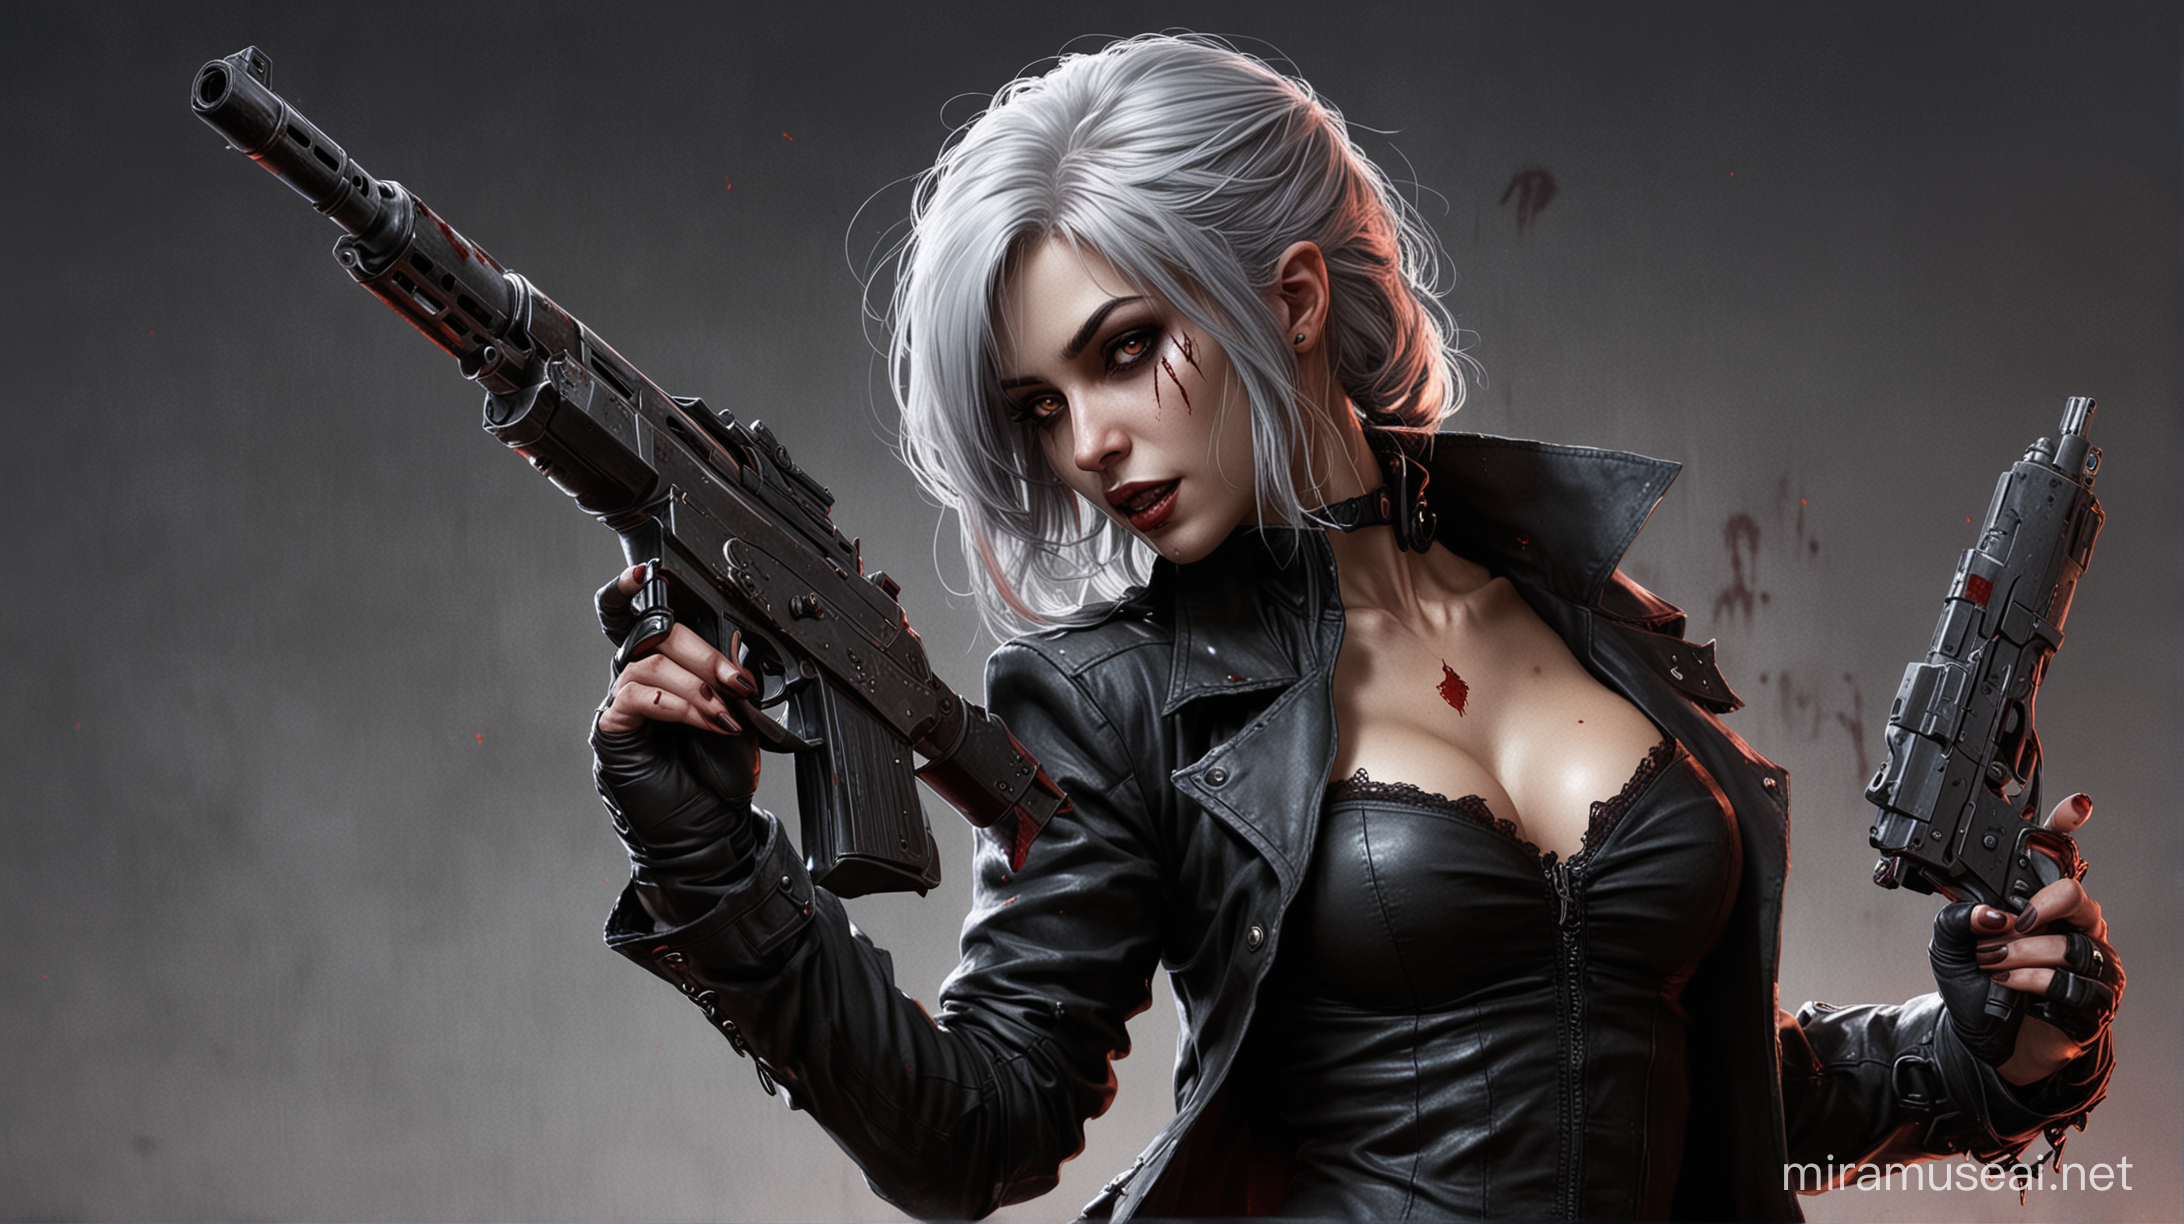 Powerful Female Tremere Vampire with Grey Hair and Guns